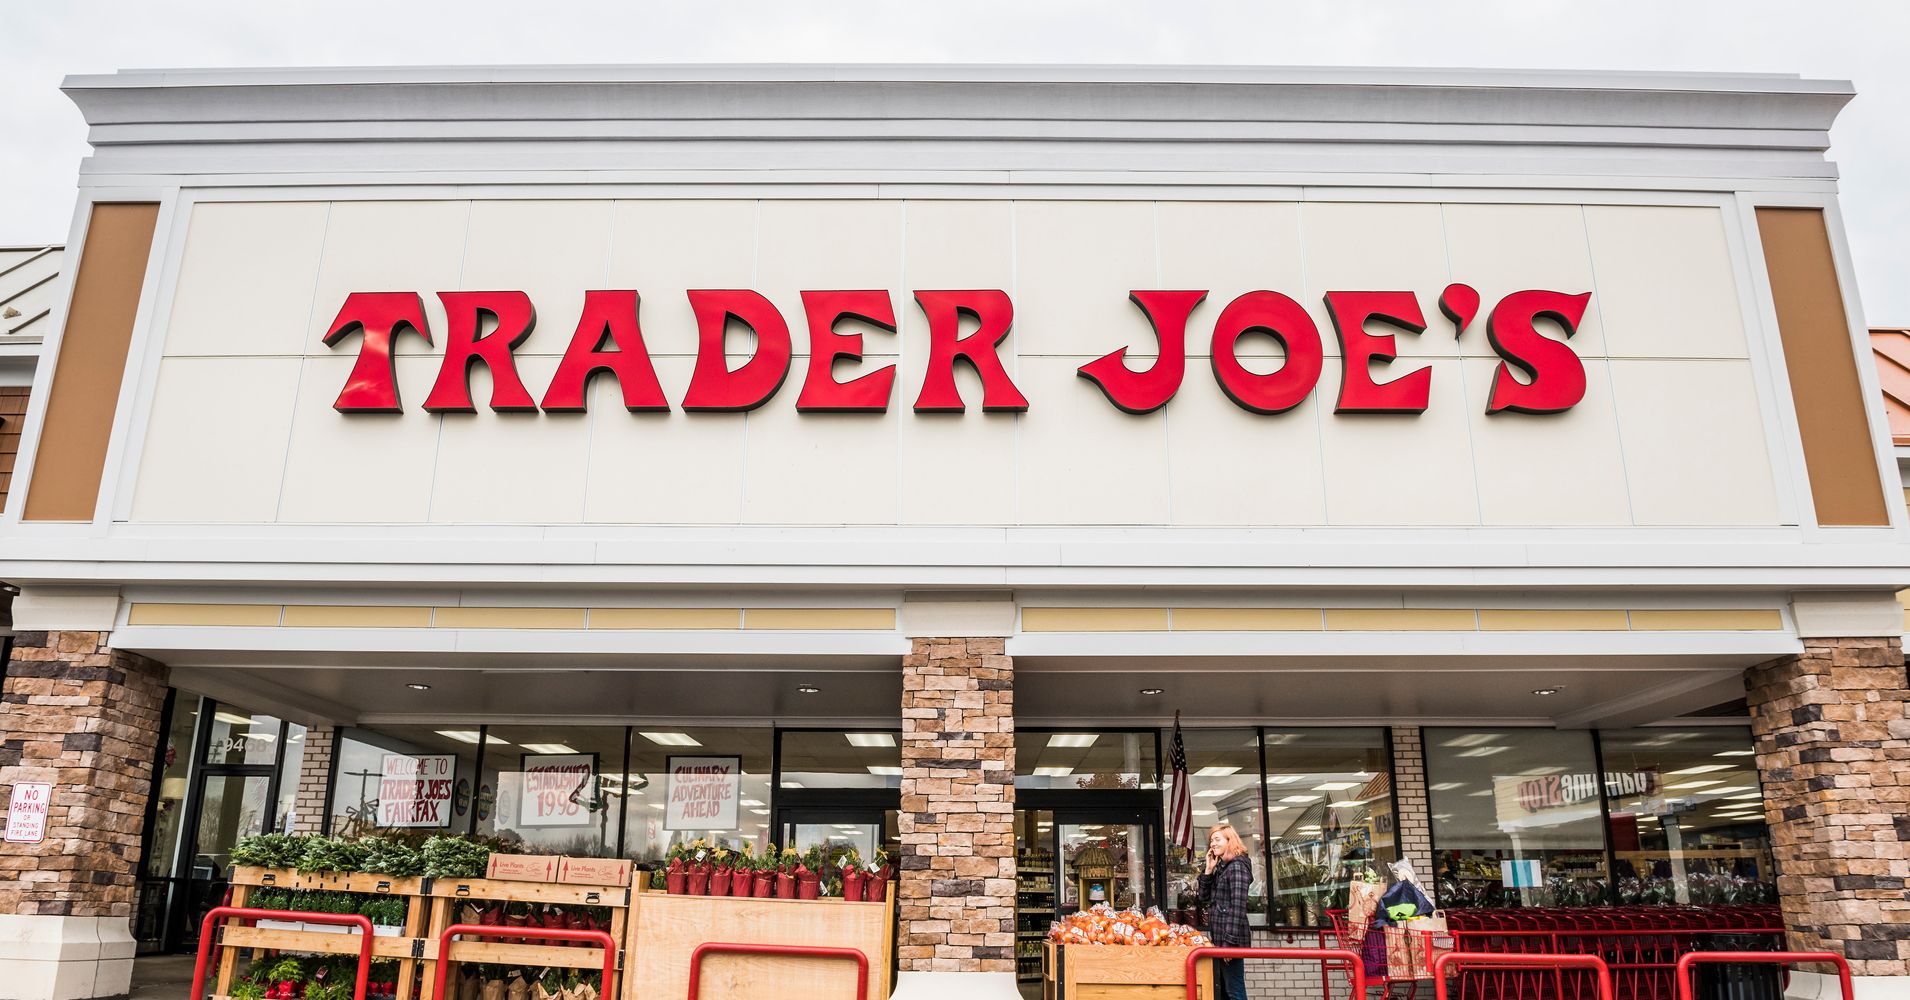 The Best Trader Joe's Food Products, According To The Brand Itself